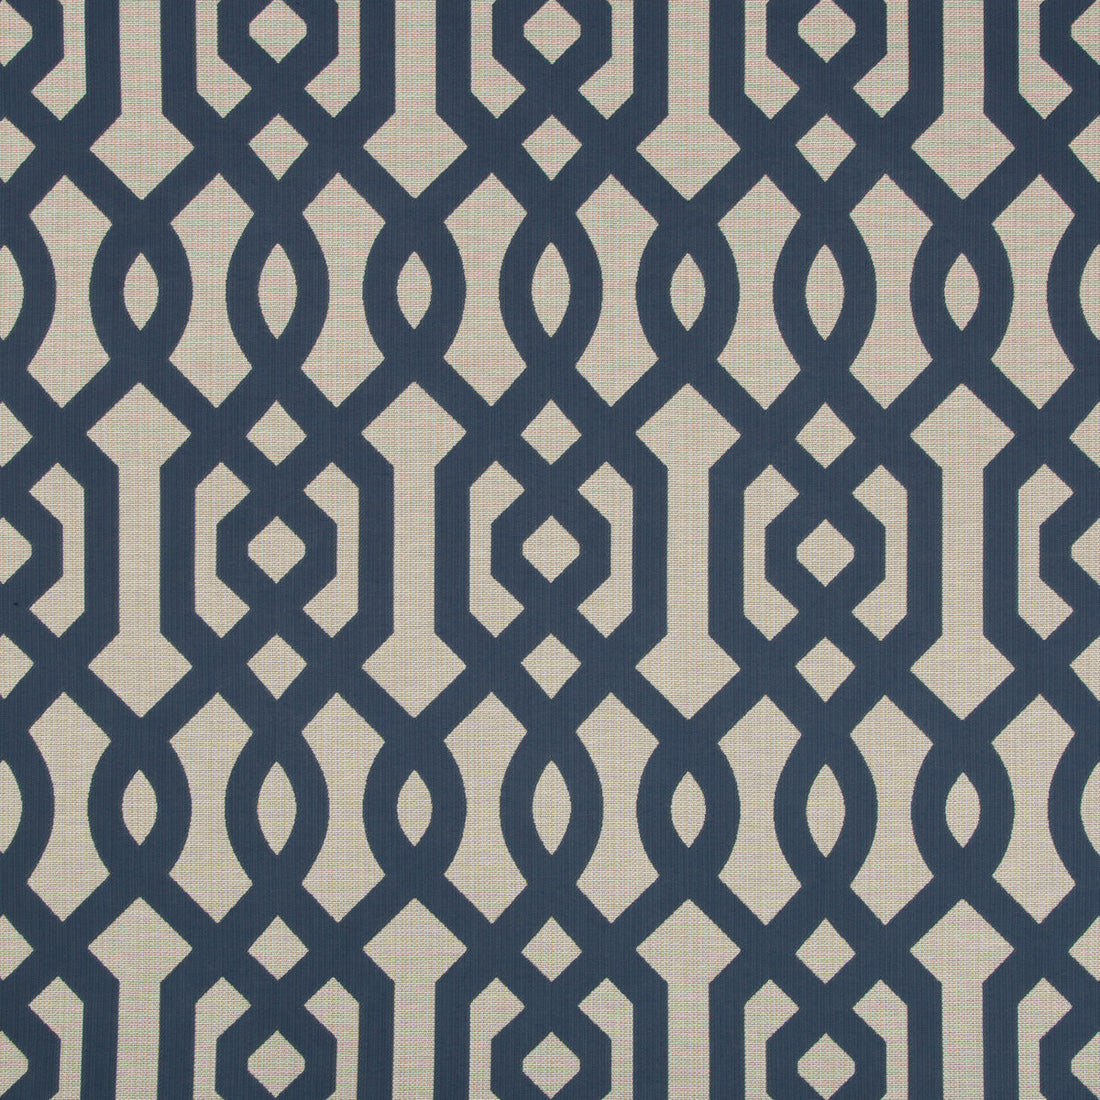 Kravet Design fabric in 34998-505 color - pattern 34998.505.0 - by Kravet Design in the Performance Crypton Home collection